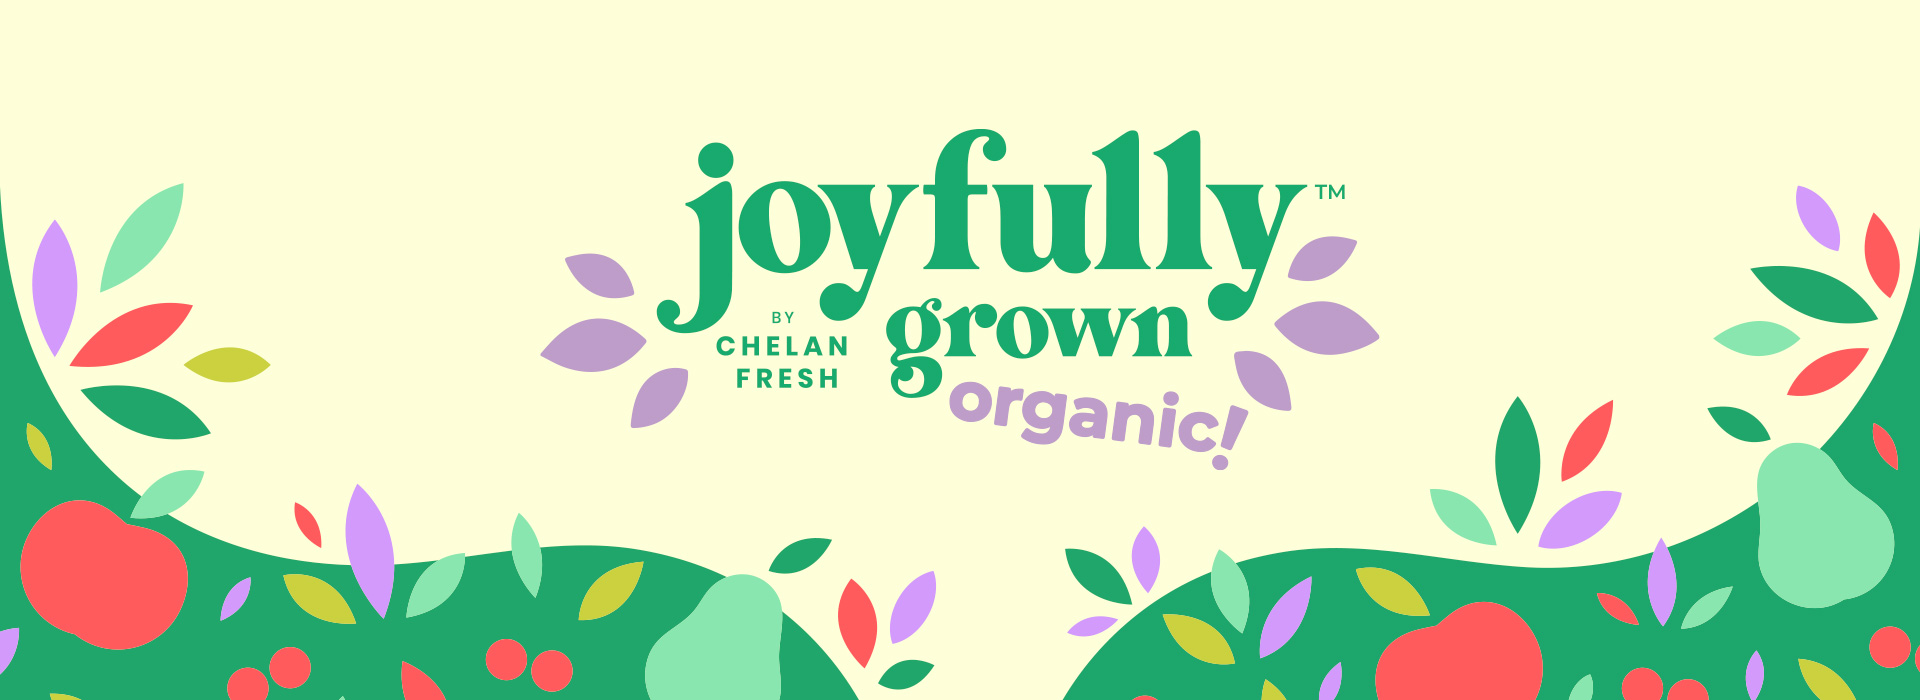 Joyfully Grown Organic Logo on a Light Yellow Banner with Colorful Apple and Pear Illustrations